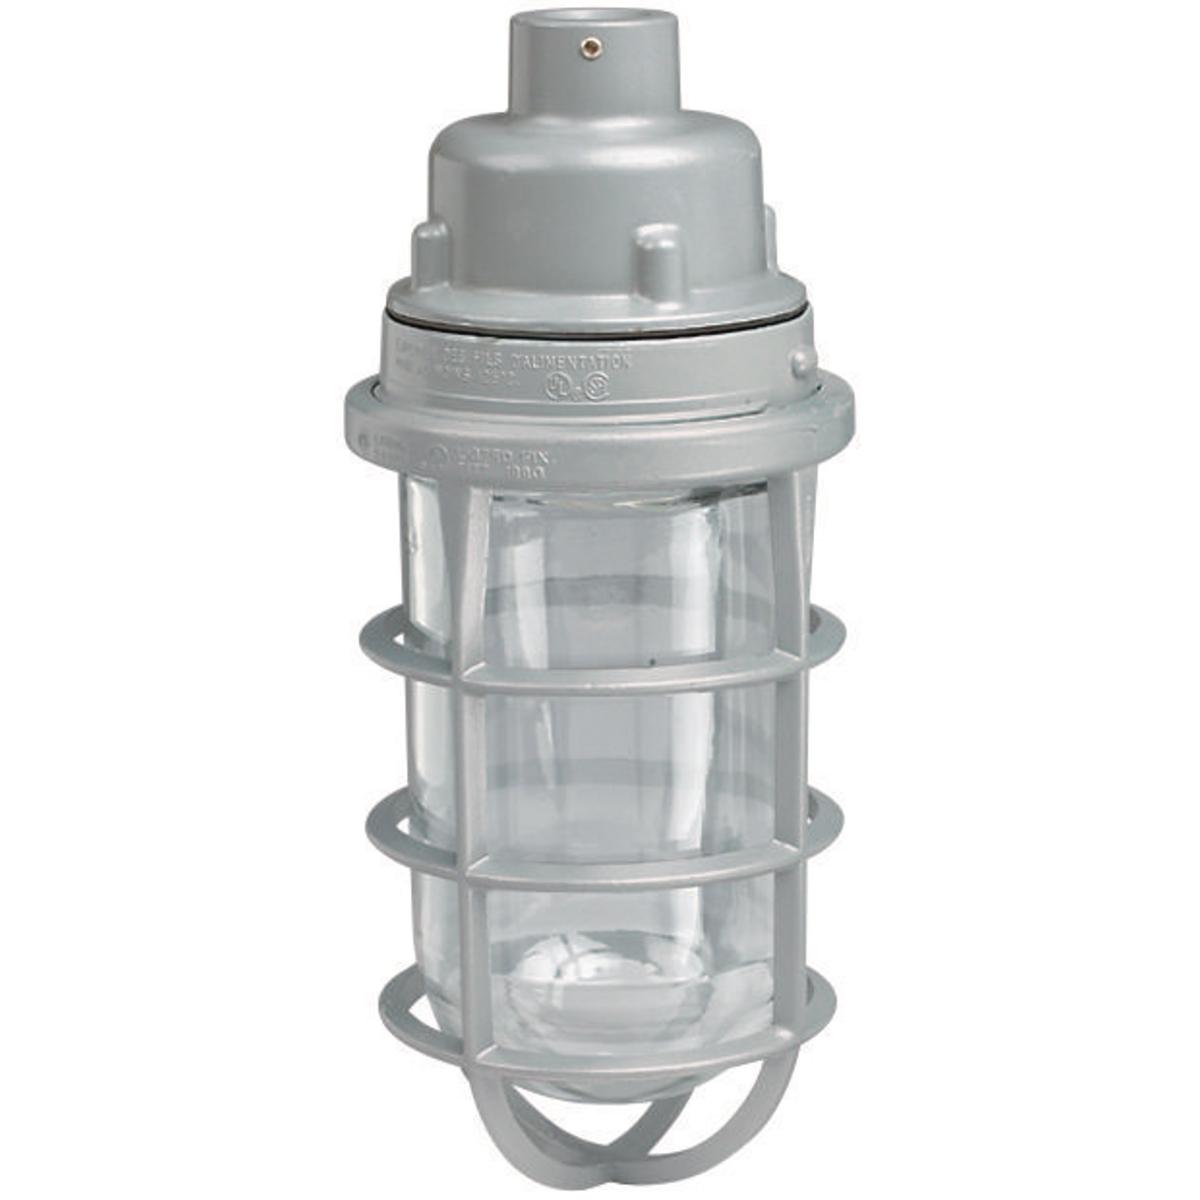 Hubbell VUAG-1-100 100W V Series Incandescent - Pendant - 1/2" Hub With Globe  ; Electrostatically applied epoxy/polyester finish ; Modular design ; Hubs are threaded for attachment to conduit ; Set screws in pendant fixture ; Copper-free aluminum (less than .004%) ; The V 